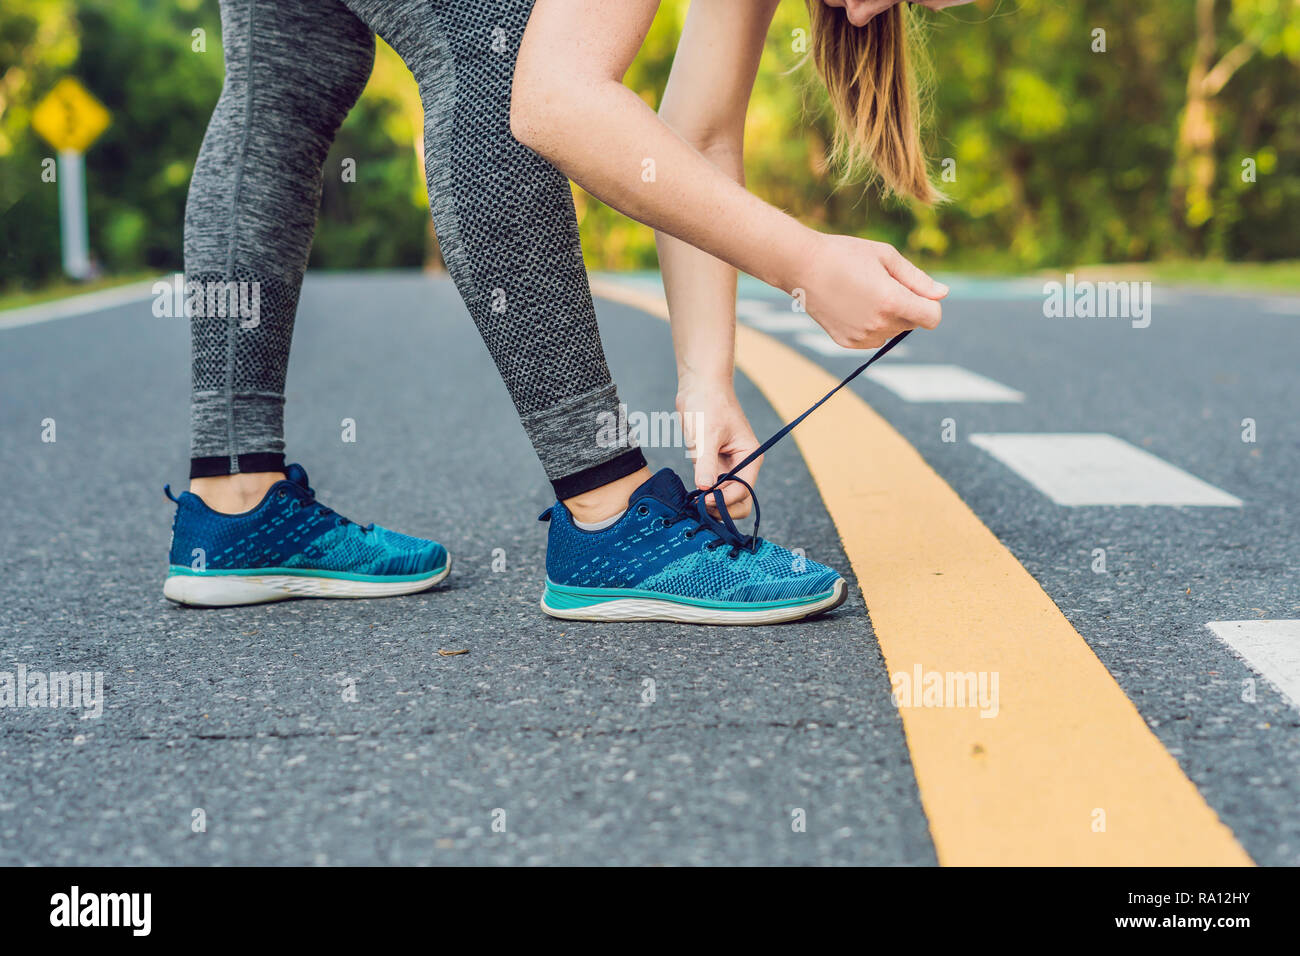 Female runner tying her shoes preparing for jogging outside .Young girld  runner getting ready for training. Sport lifestyle Stock Photo - Alamy